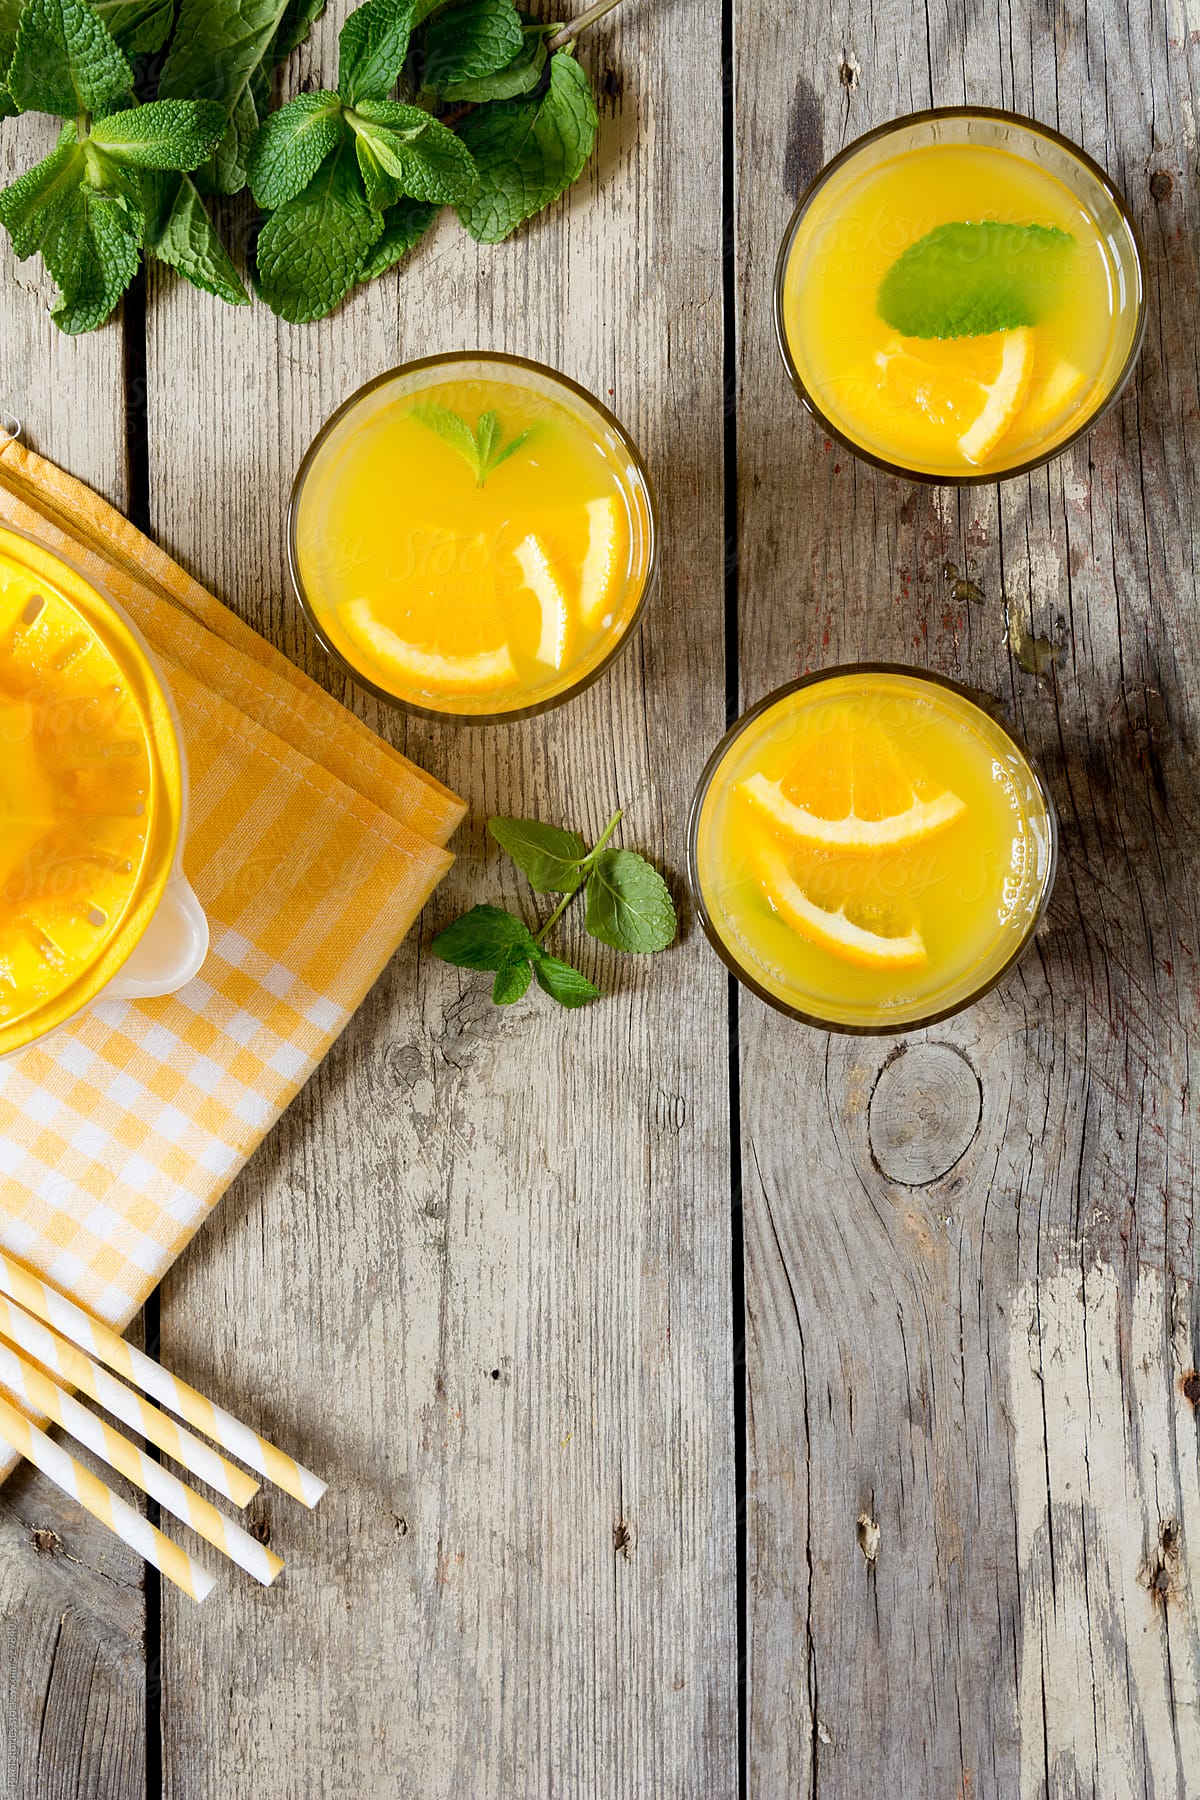 Drinks: orange juices, mint leaves, straws and citrus juicer from above